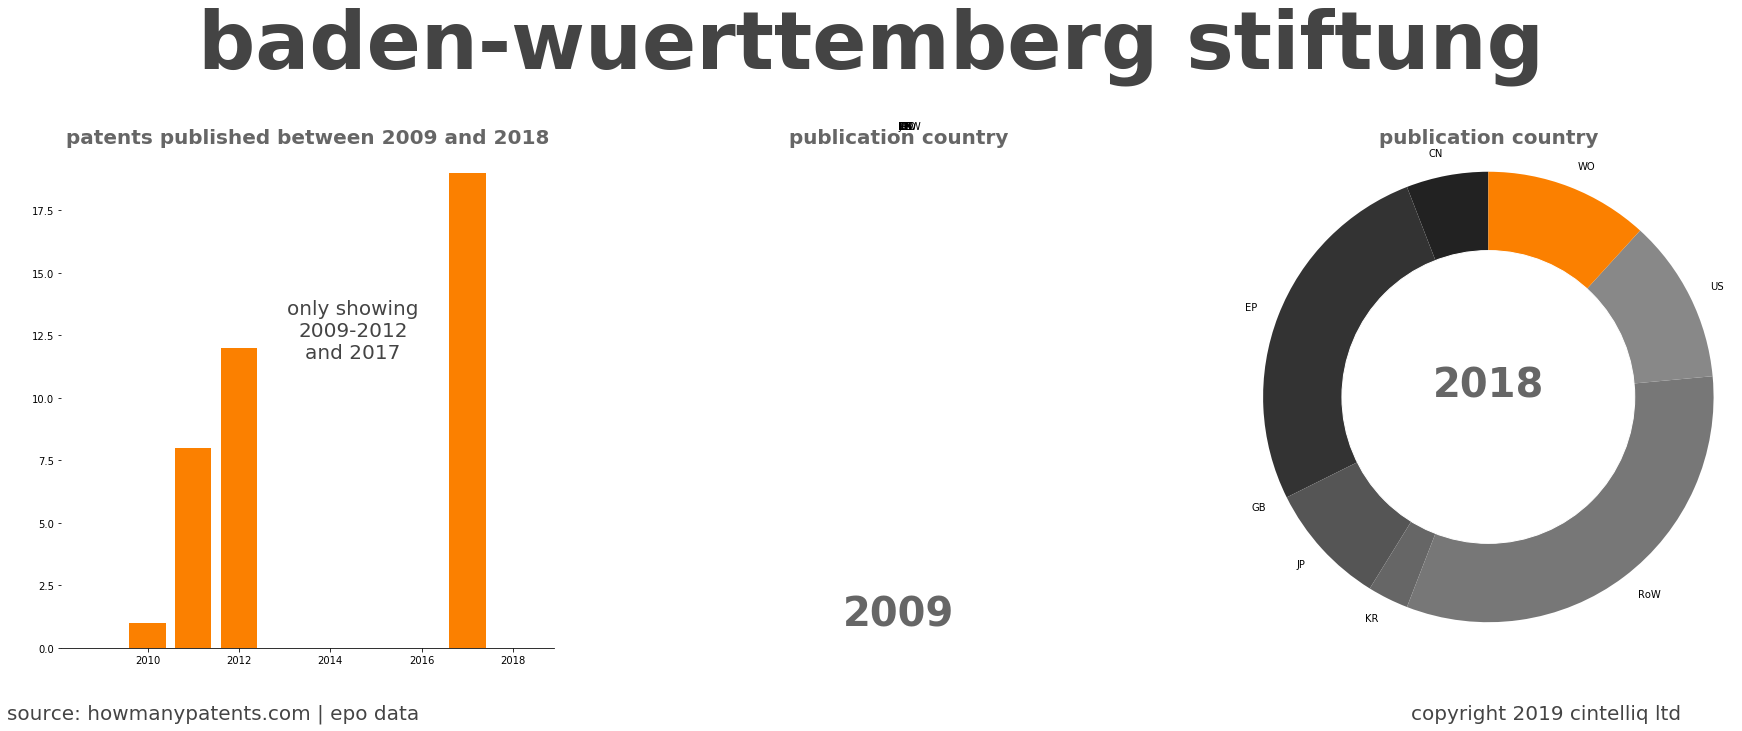 summary of patents for Baden-Wuerttemberg Stiftung